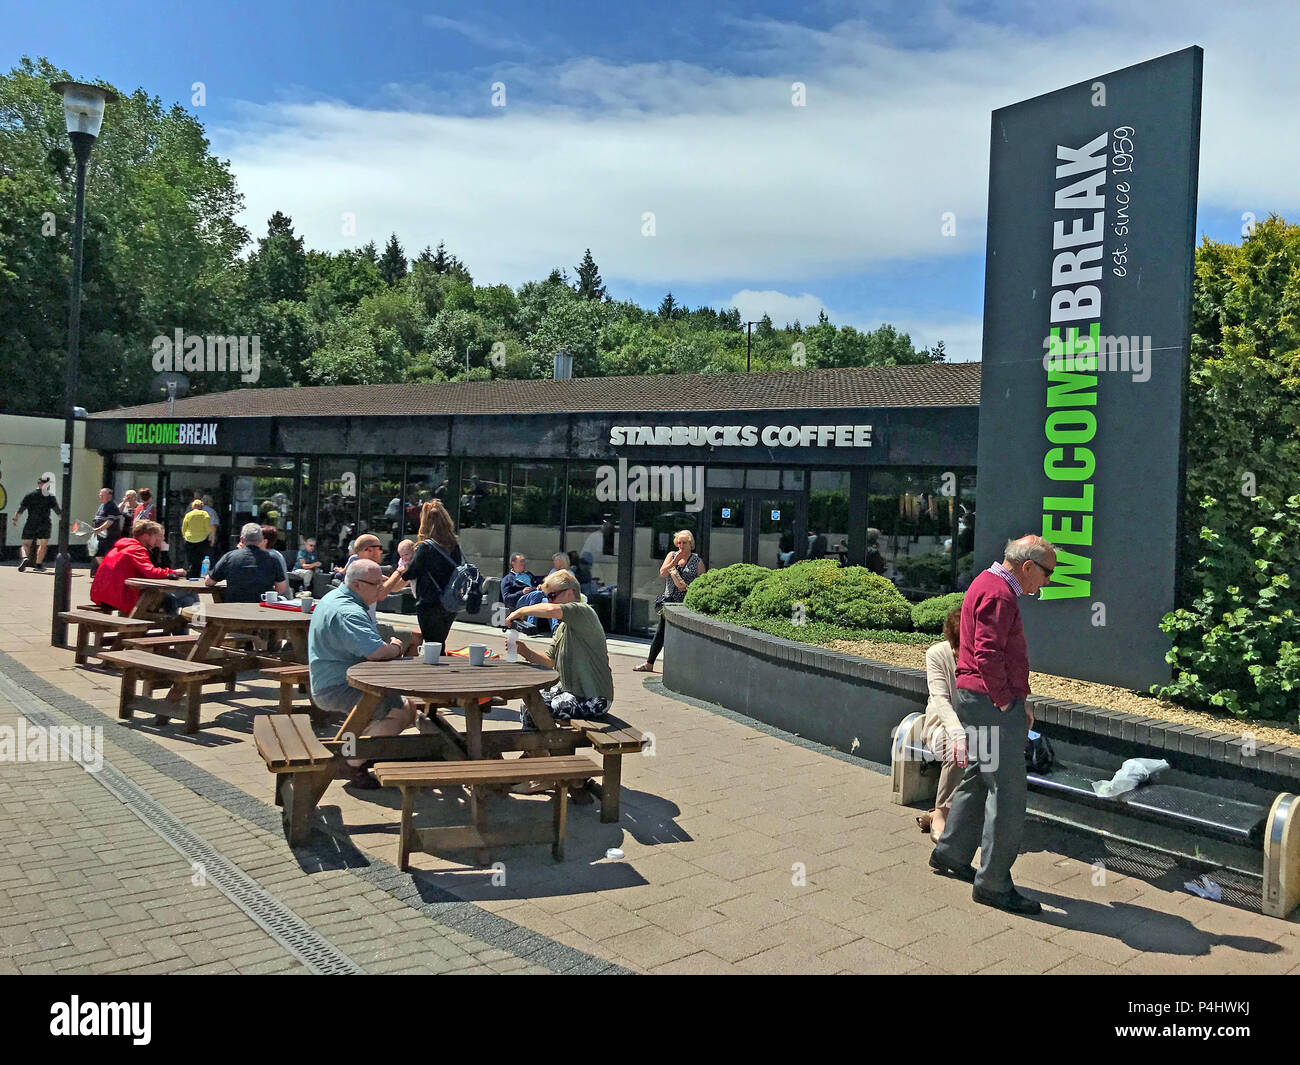 Welcome Break, Michaelwood Services - M5 South, Dursley, Southern Gloucestershire, England, Großbritannien, GL11 6DD Stockfoto